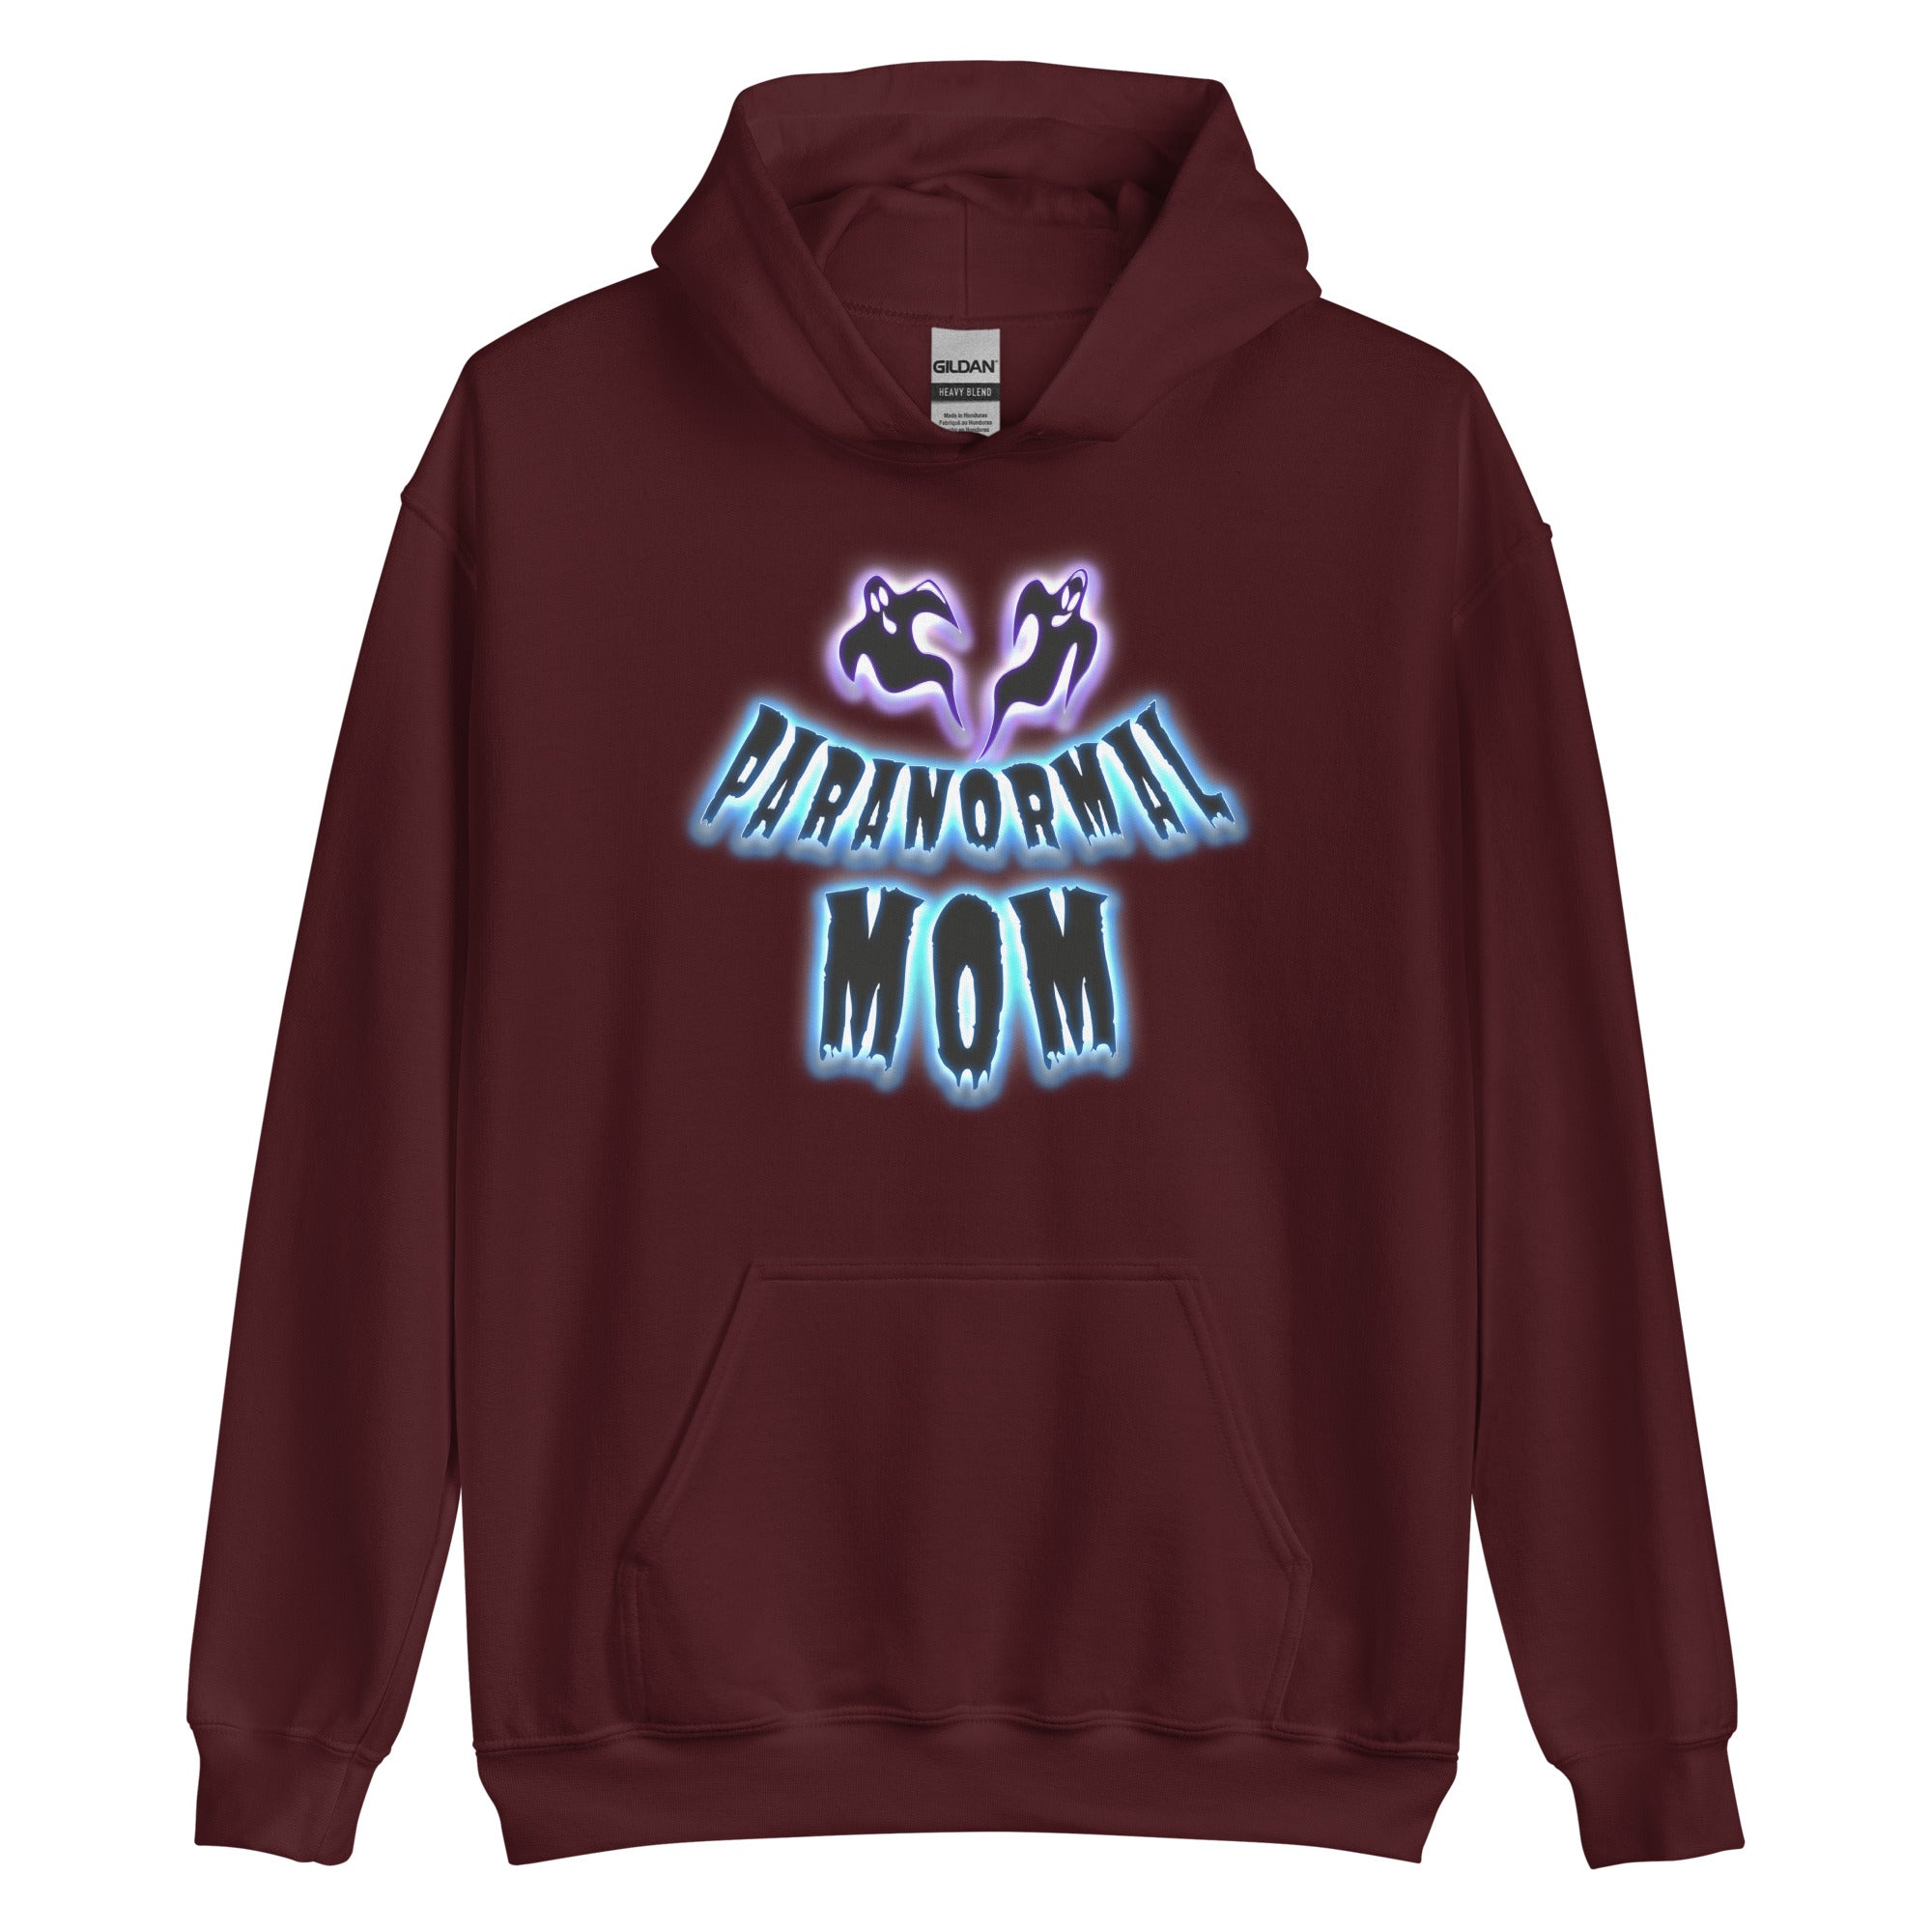 Paranormal Ghost Mom Poltergeist Mother's Day Pullover Hoodie Sweatshirt